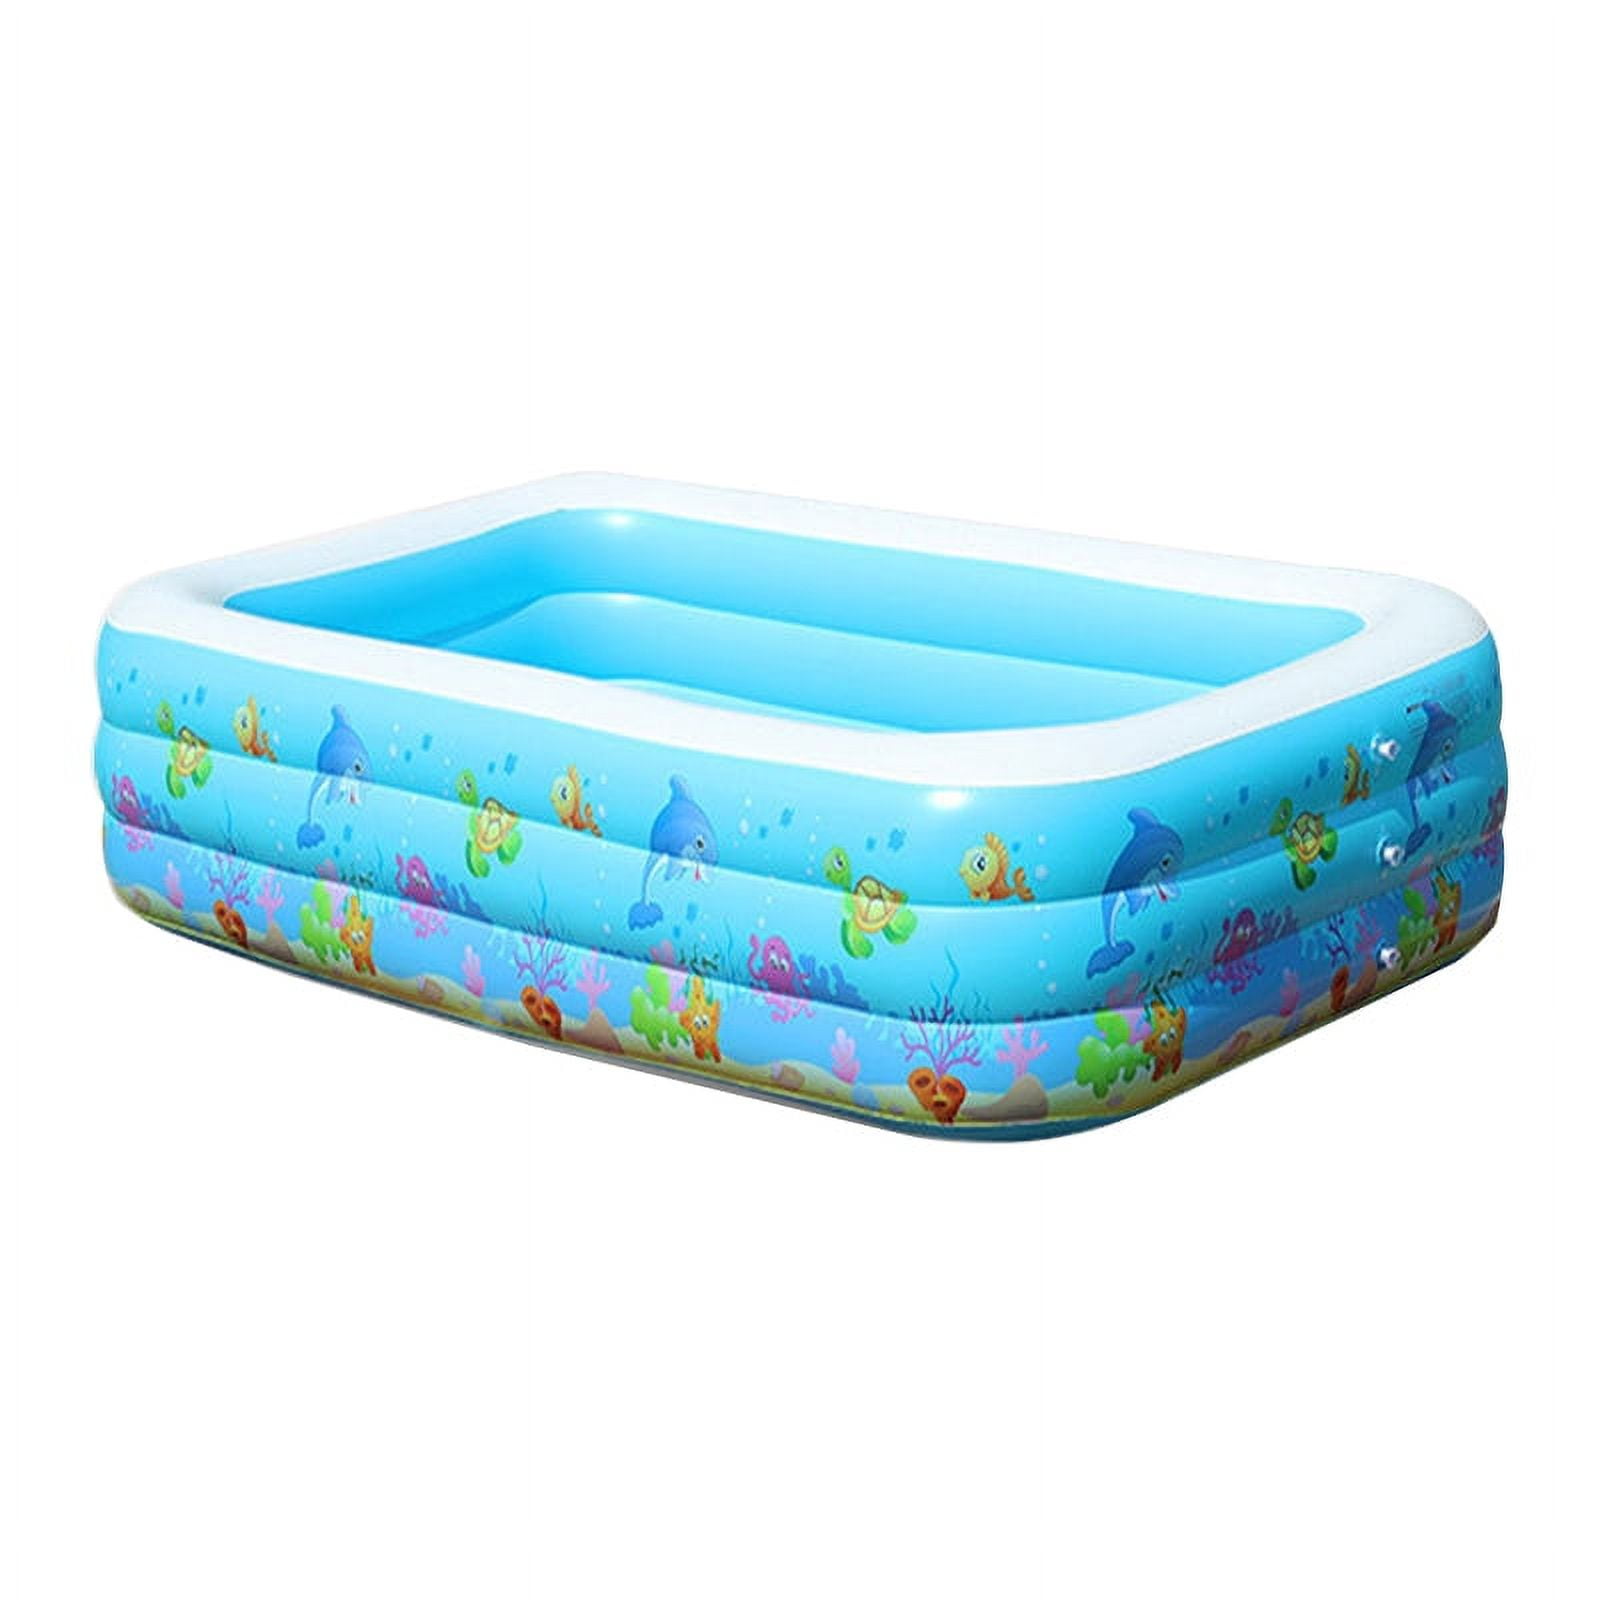 Inflatable Swimming Pool, Flower Shaped Kiddie Pool, Baby Bathtub Basin,  Summer Beach Party Decorations For Kids